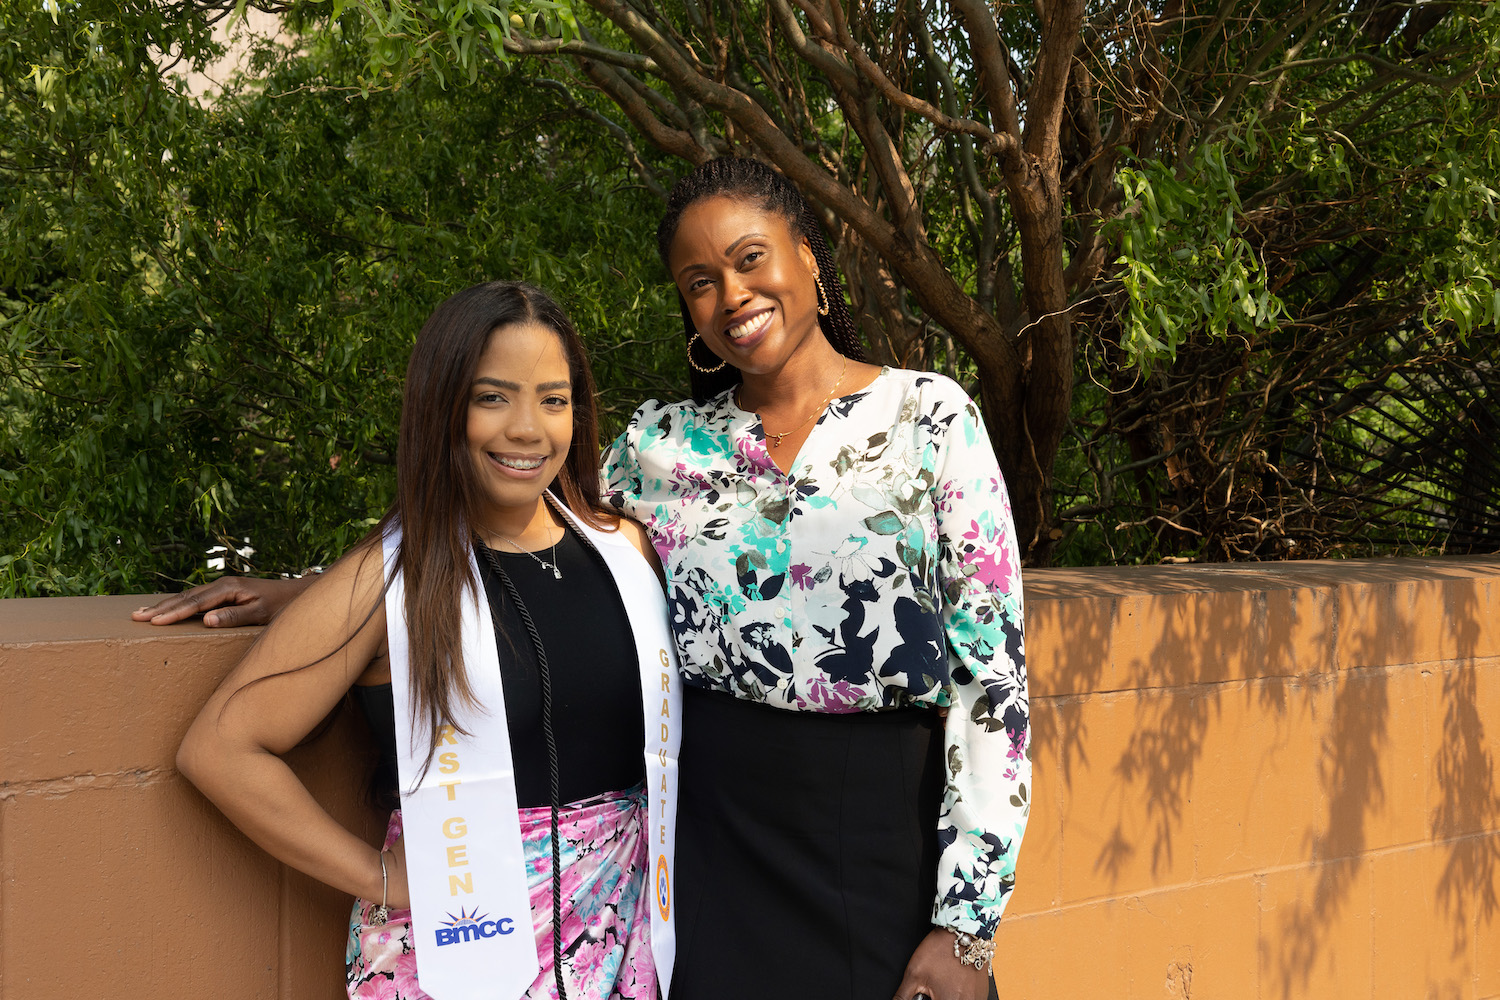 New and First-Year Student Programs Specialist Rahana Belle-Jerome (right) with her Panther Partner mentee Karisleidy Nicole Castellanos Diaz